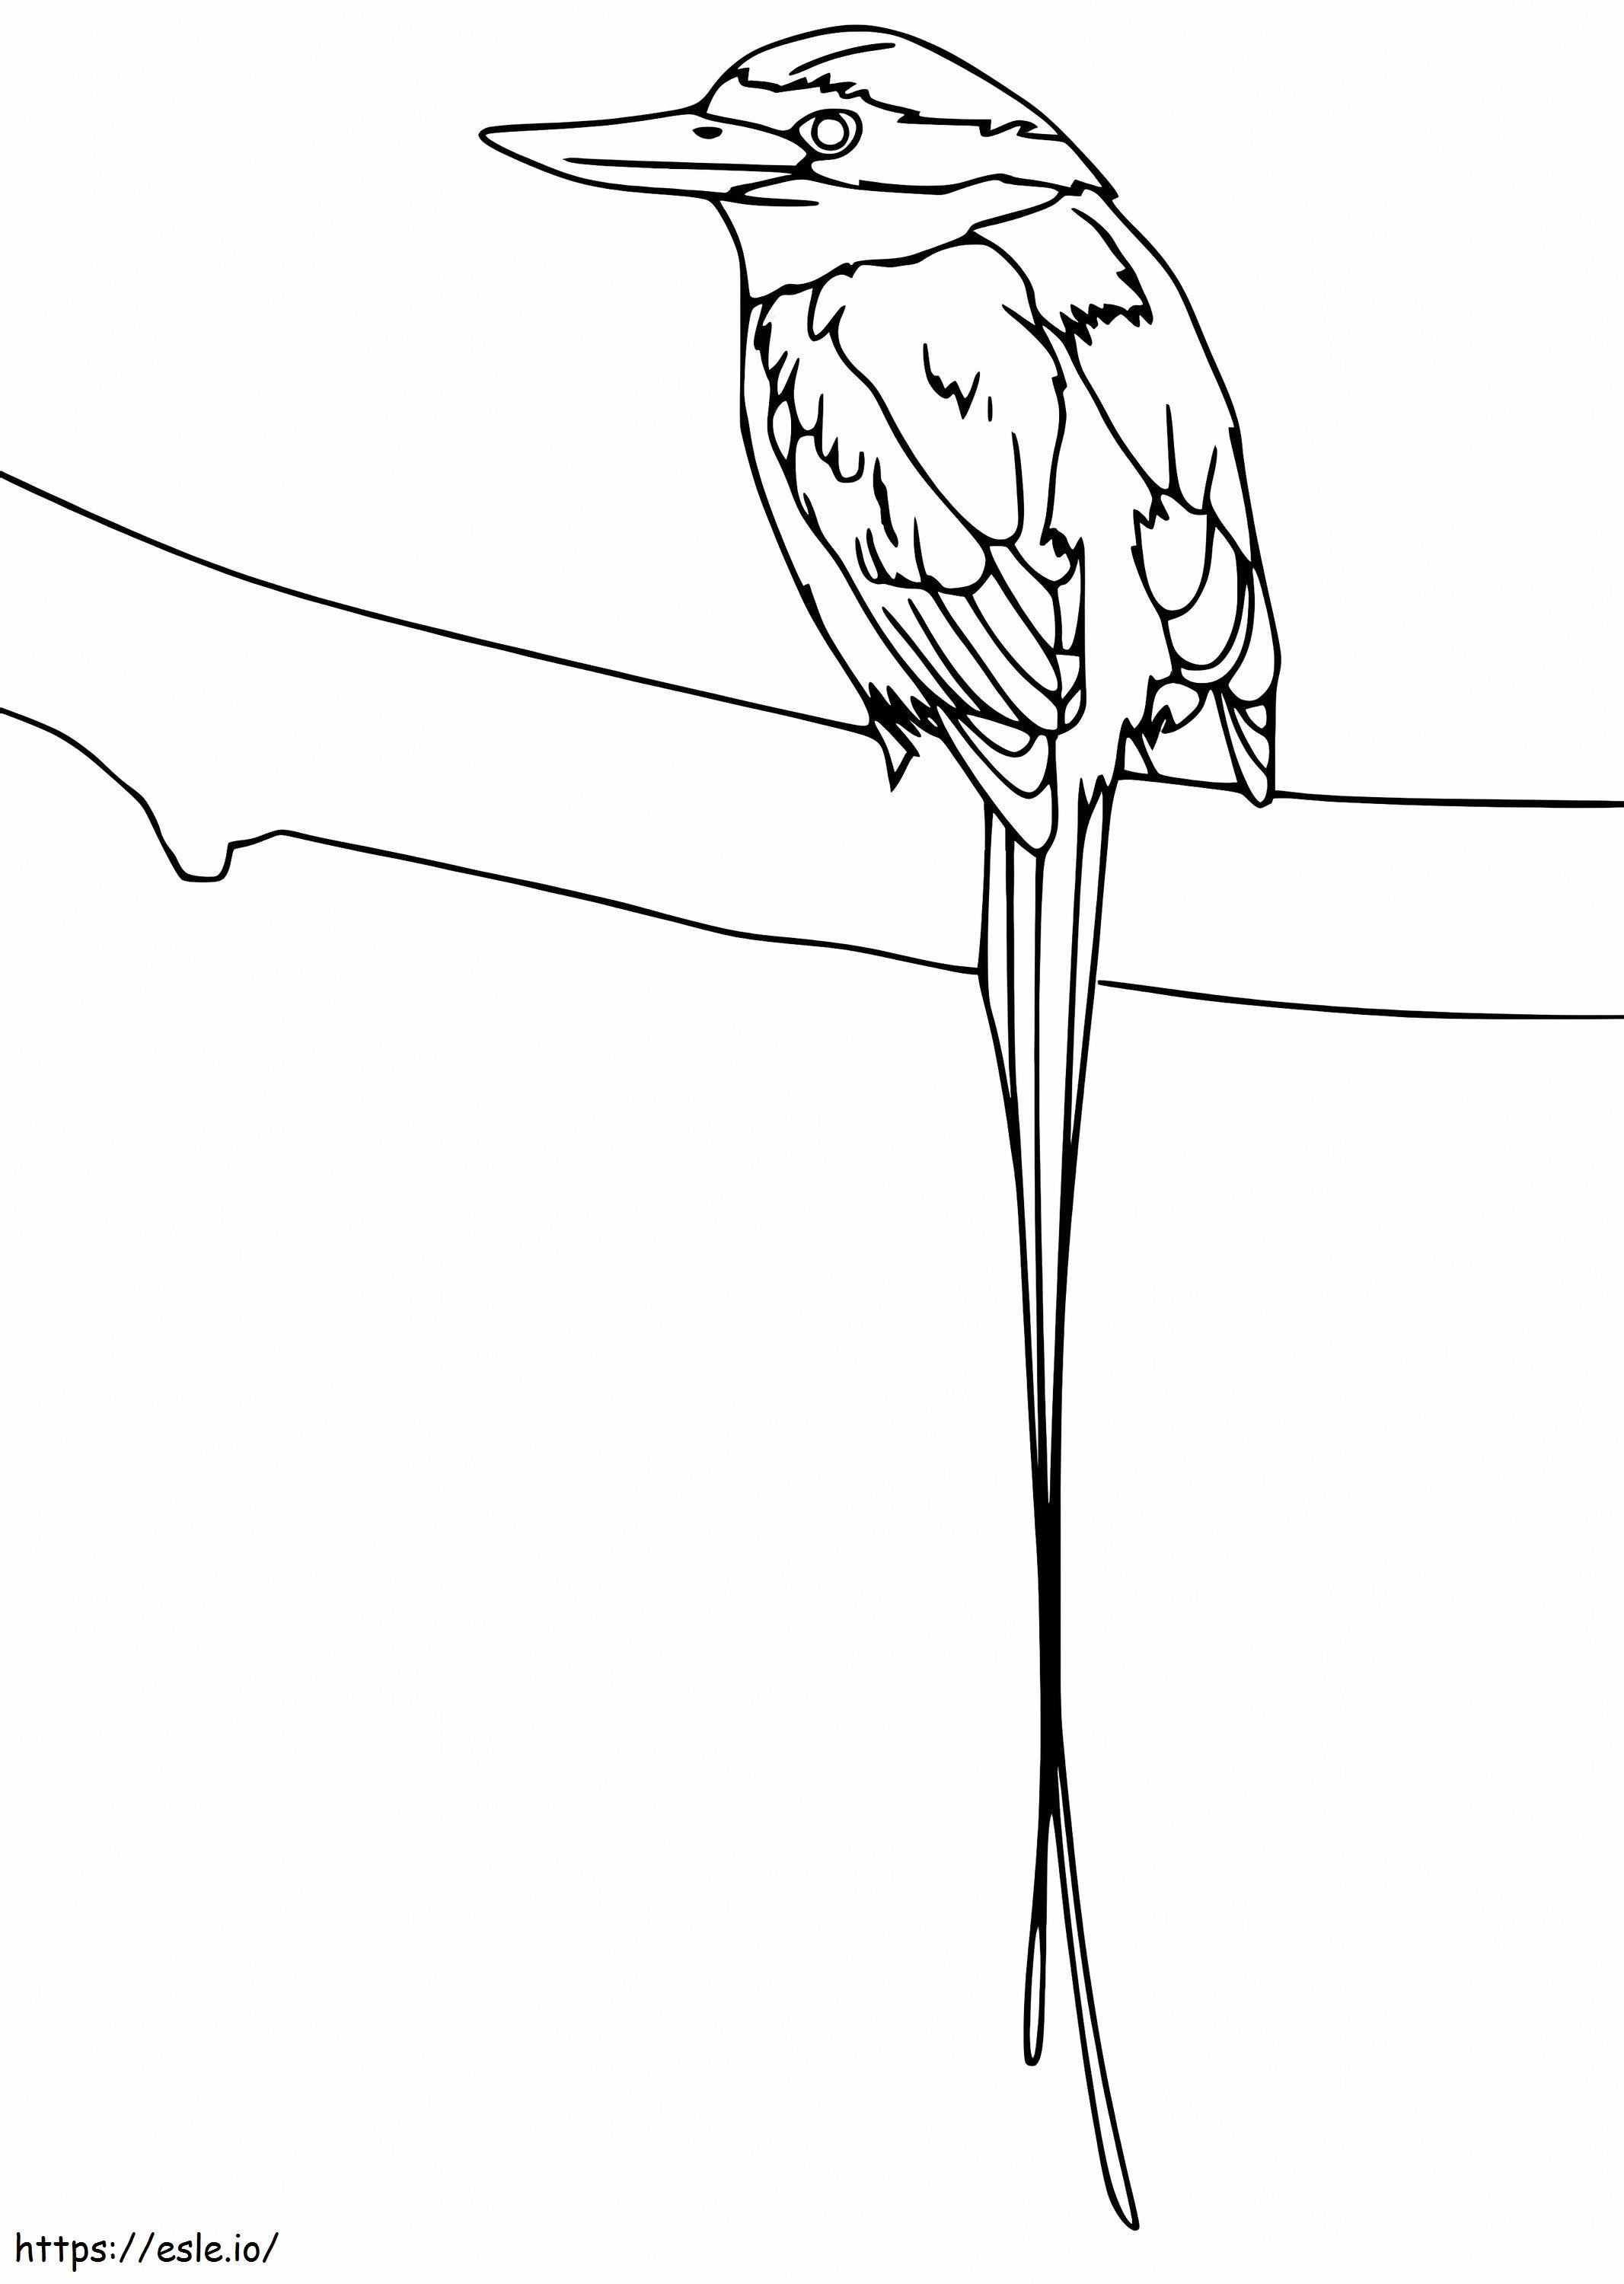 Bird Of Paradise On Branch coloring page